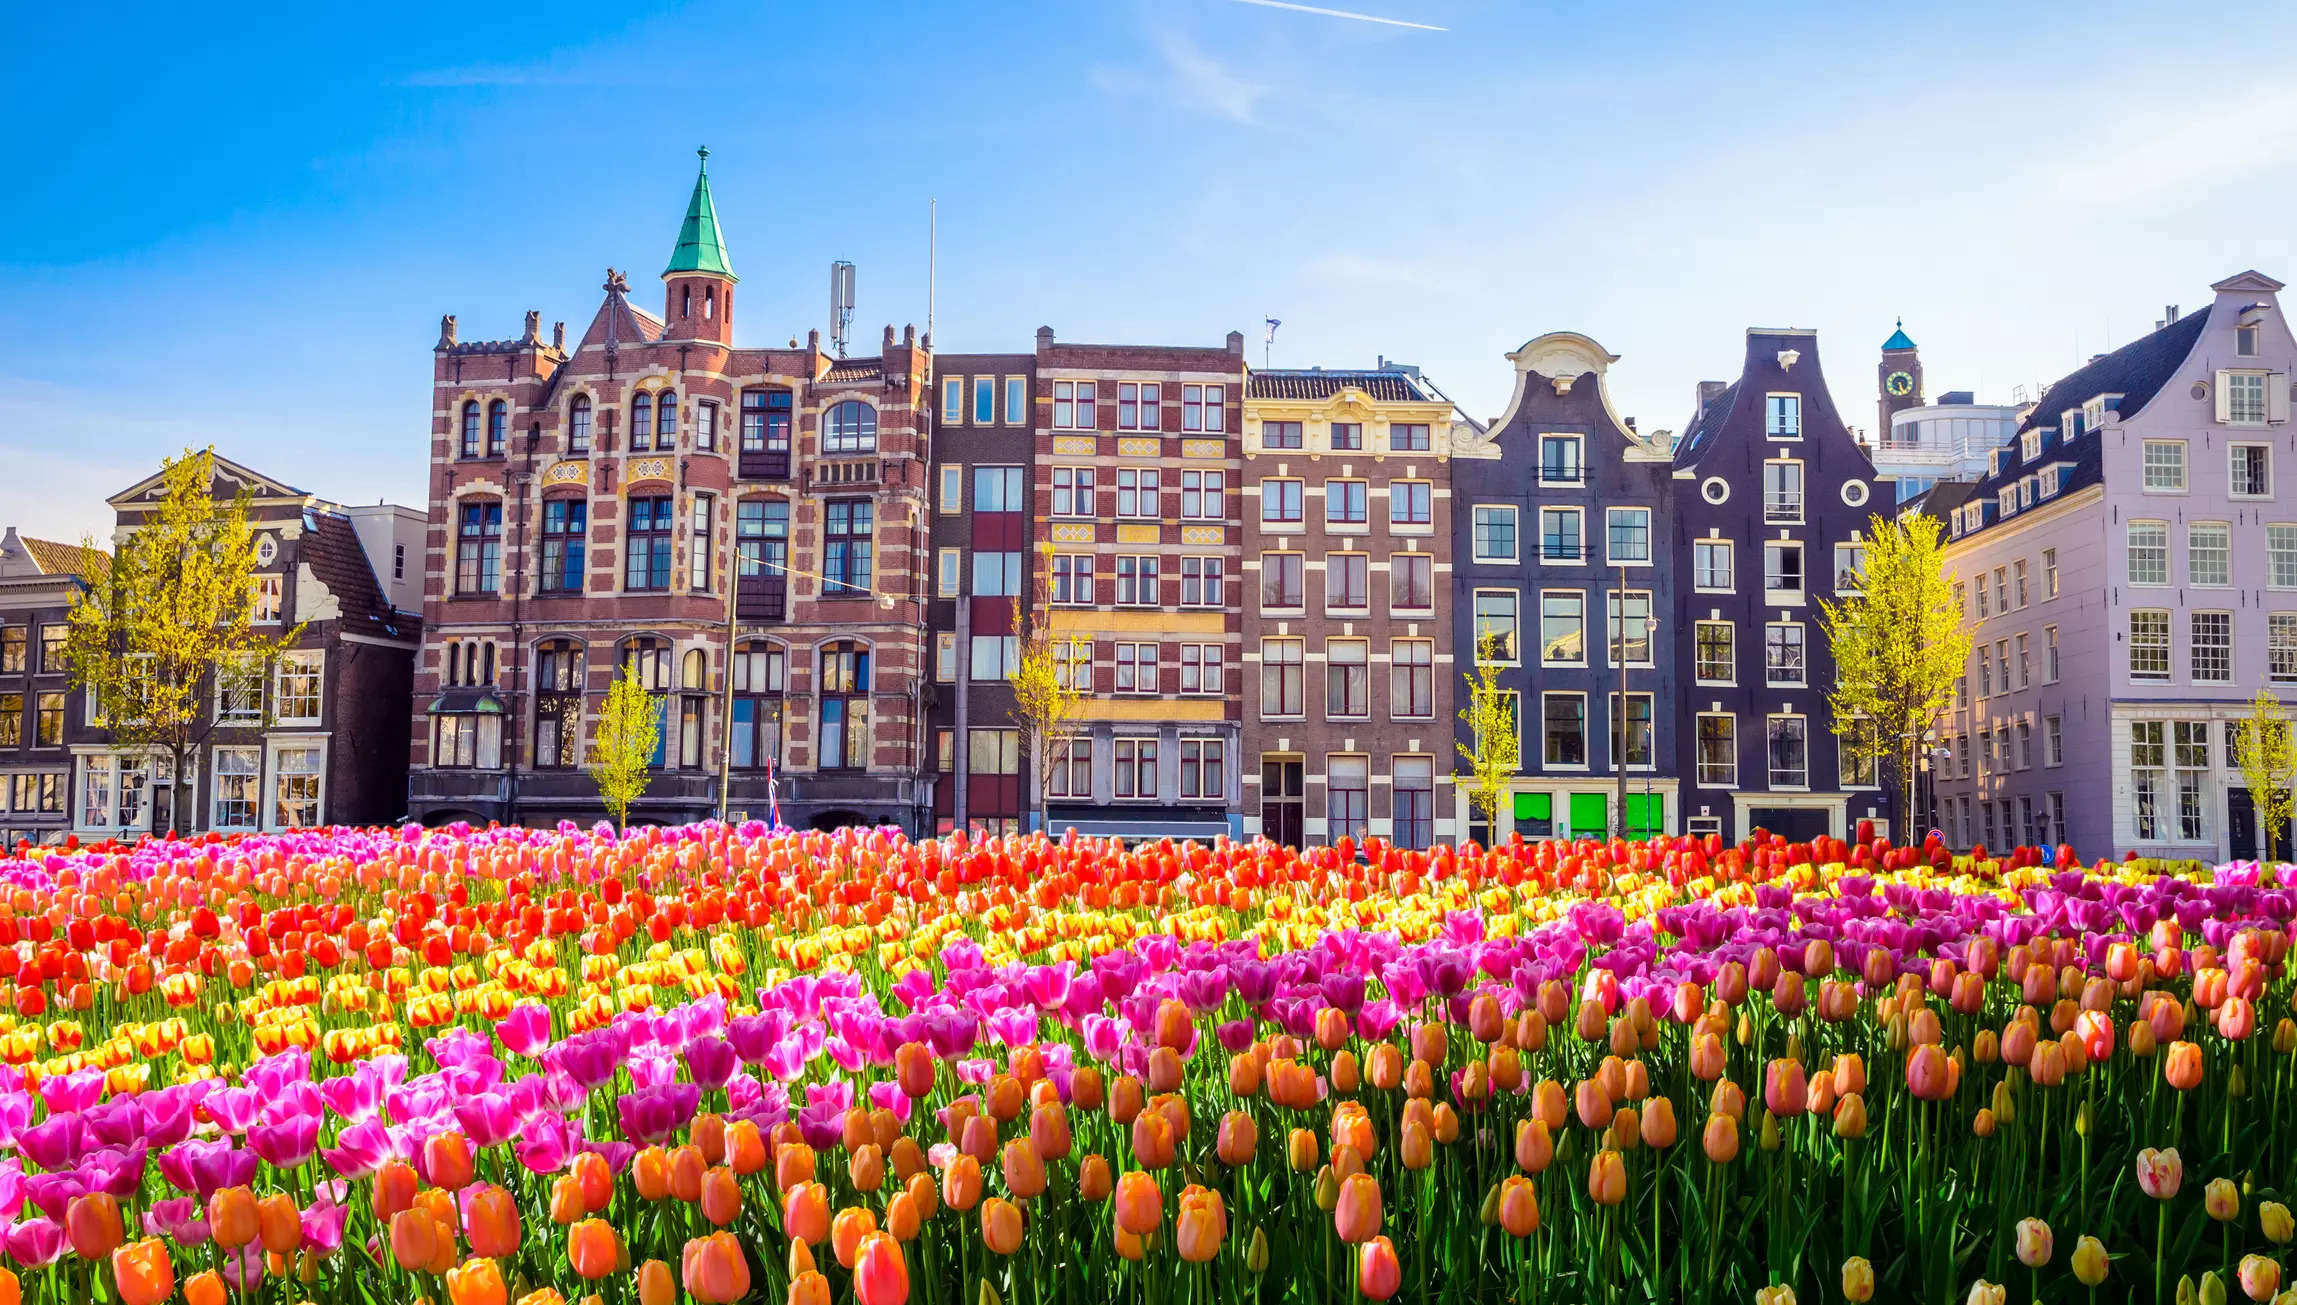 Netherland Free Tips: You can win a free trip to the Netherlands if you ...